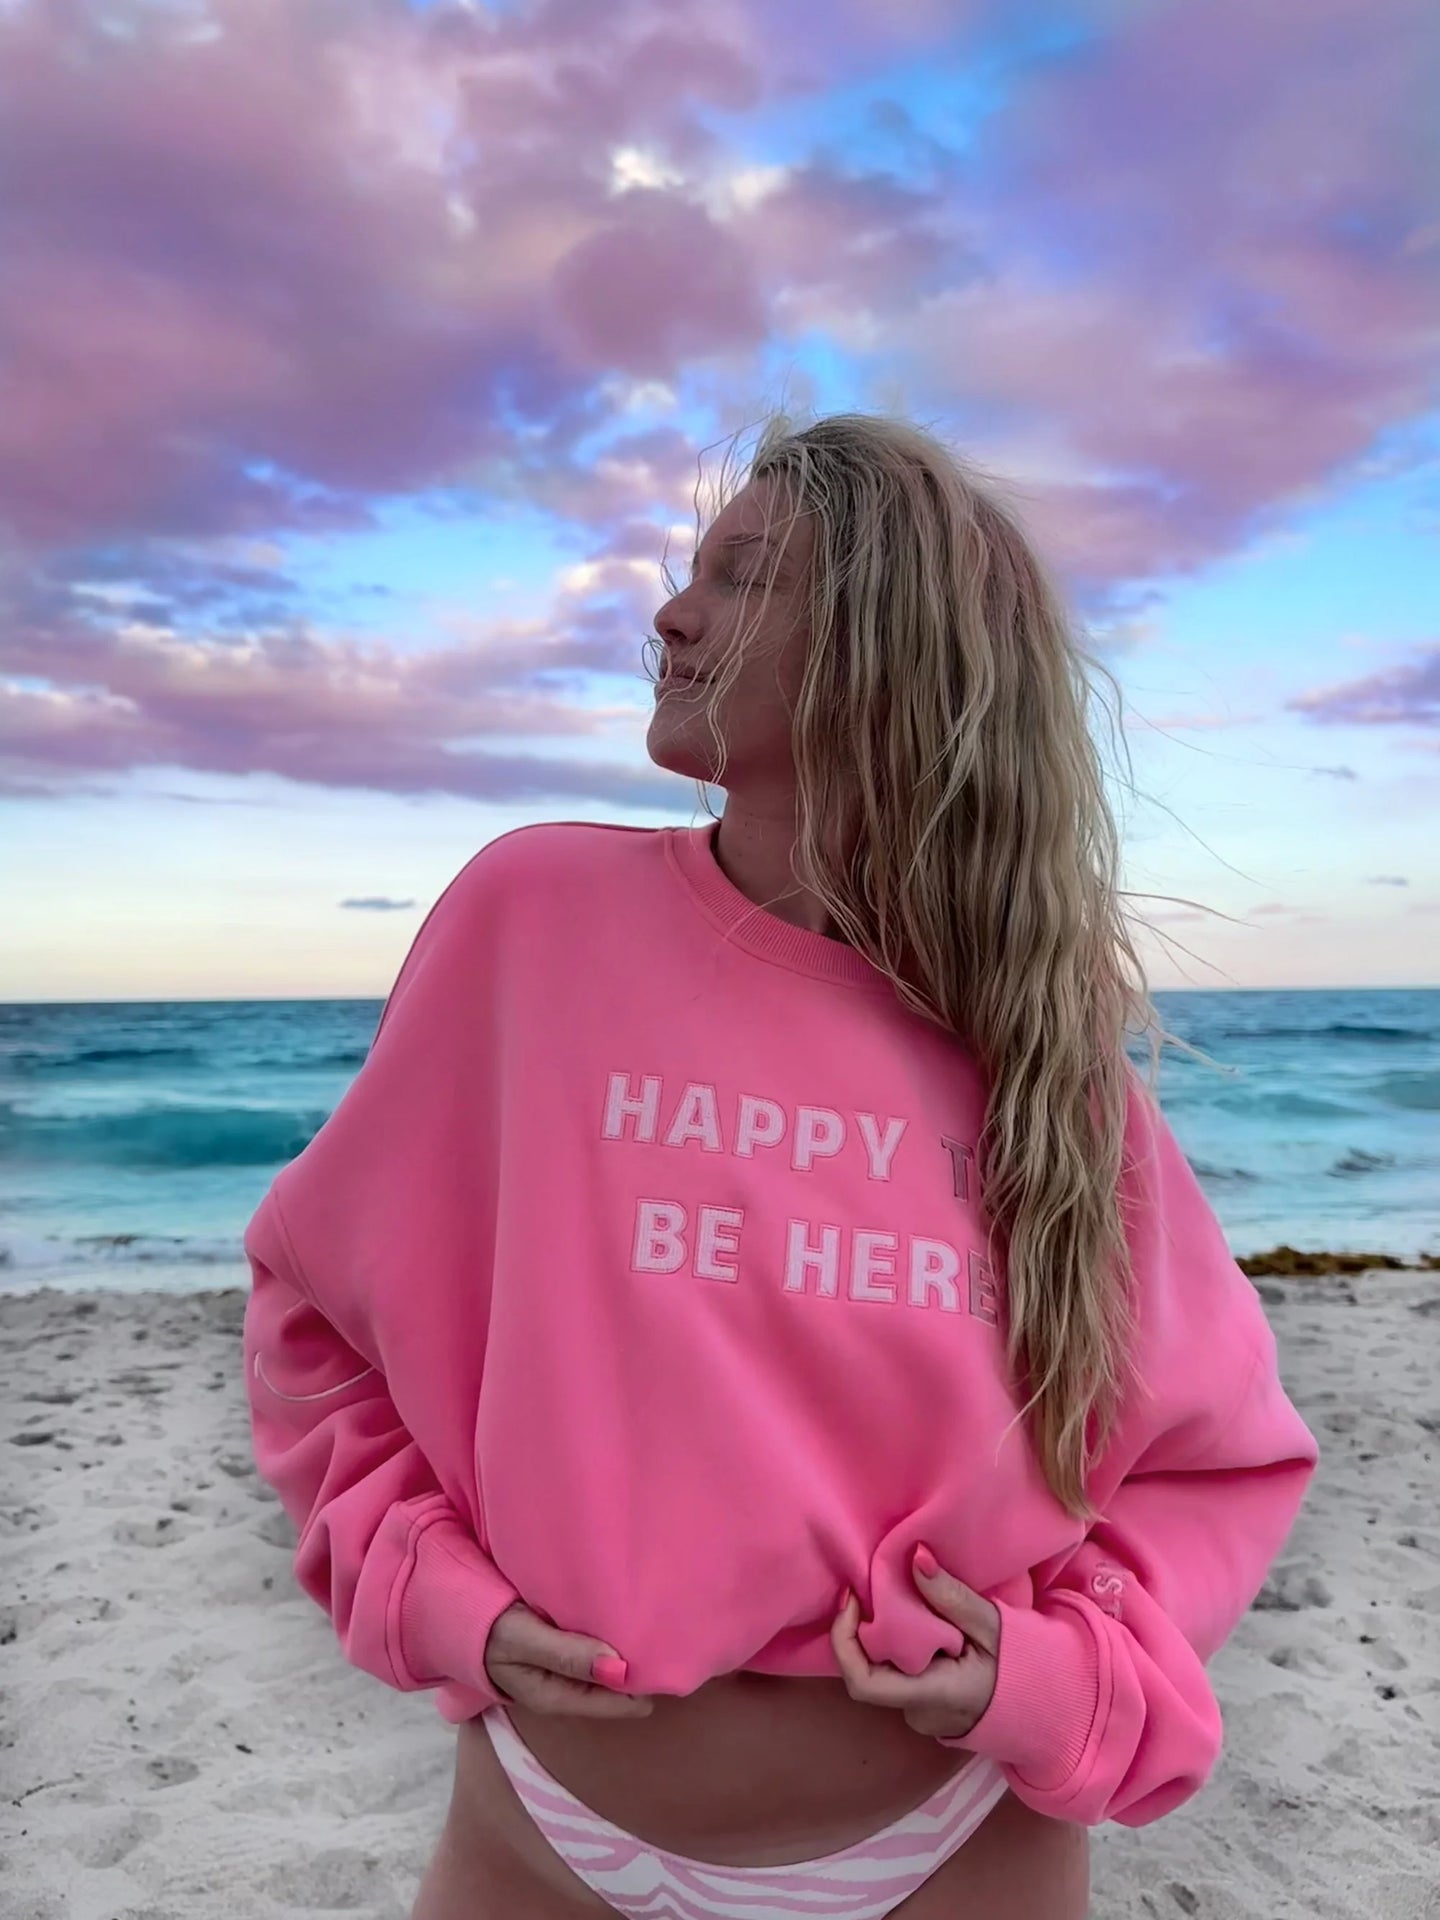 “I Am Just Happy To Be Here” Crewneck